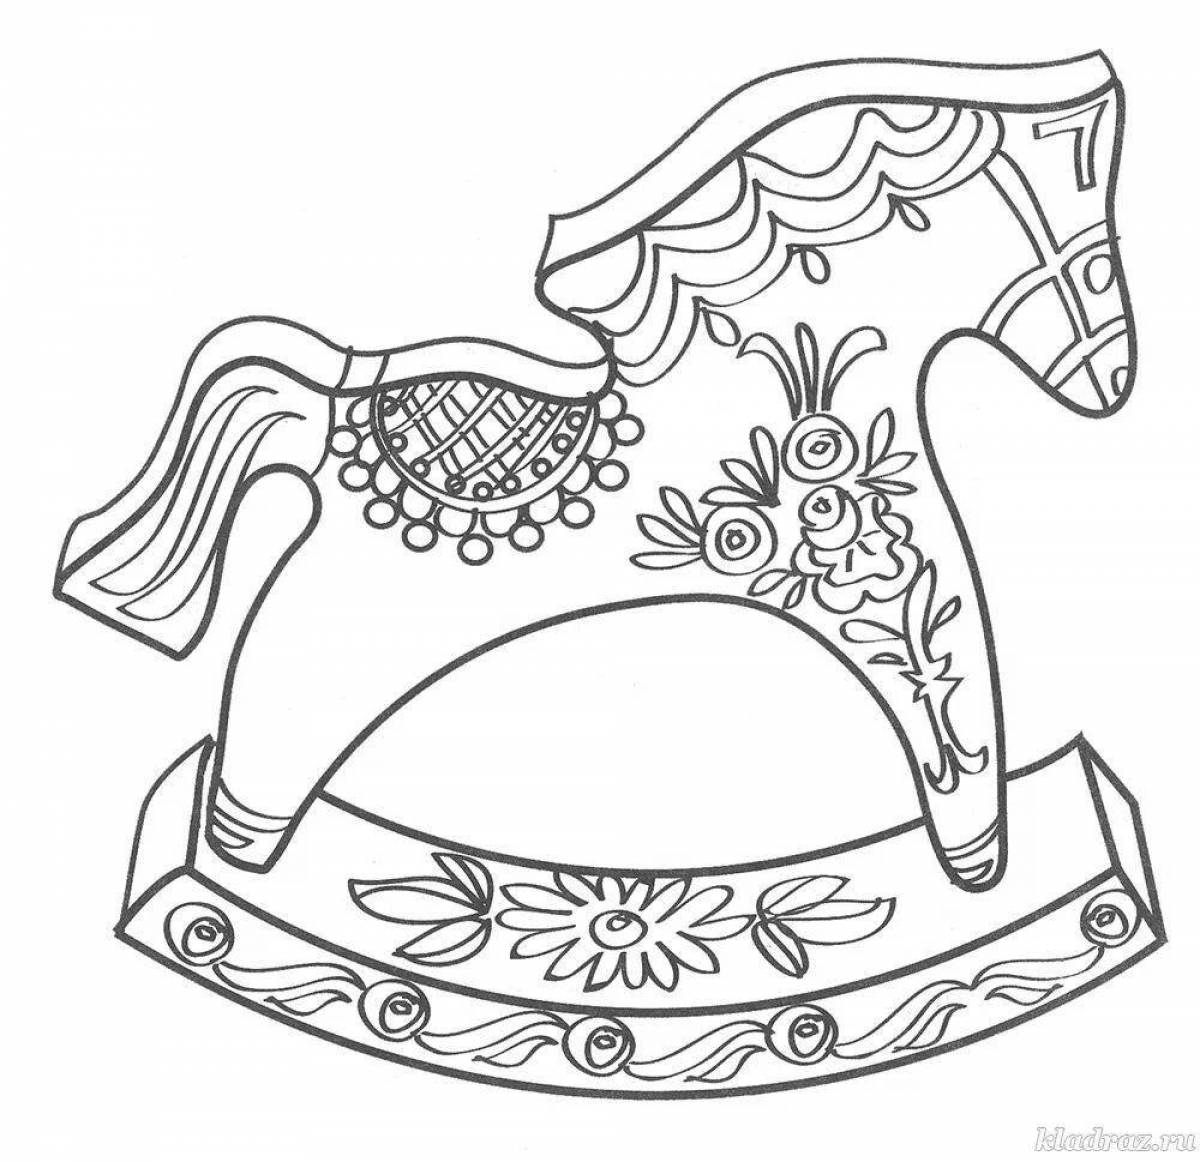 Glittering rocking horse coloring page